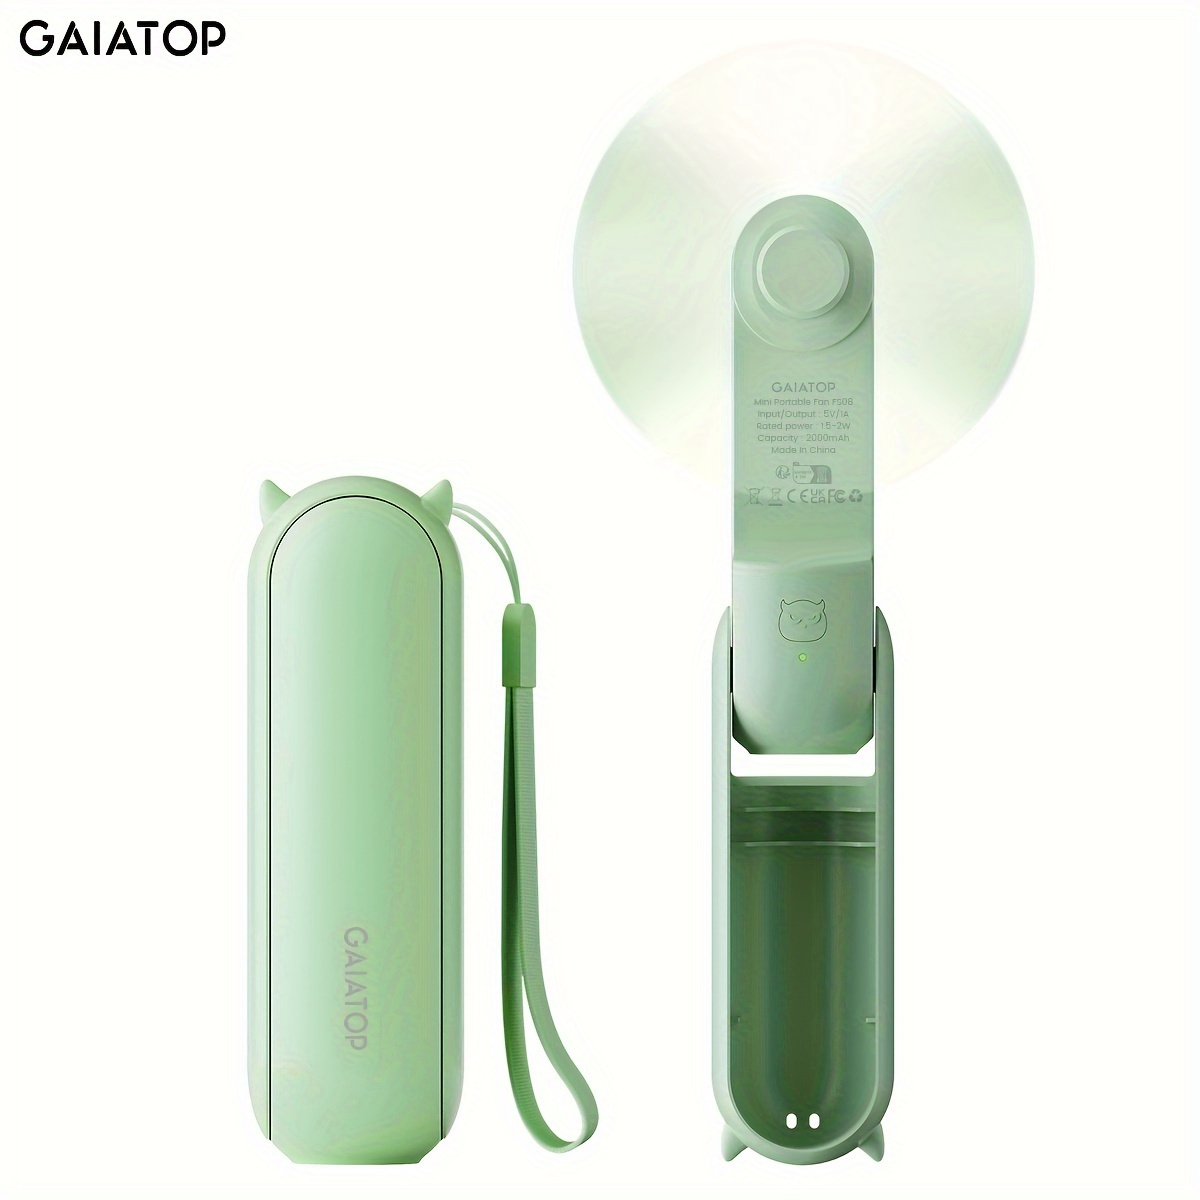 

Gaiatop Portable Handheld Fan, Compact Folding Design, Mini Personal Cooling Device, Usb Rechargeable 2000mah Battery, Ideal For Travel & Outdoor Activities - Pink/green Options